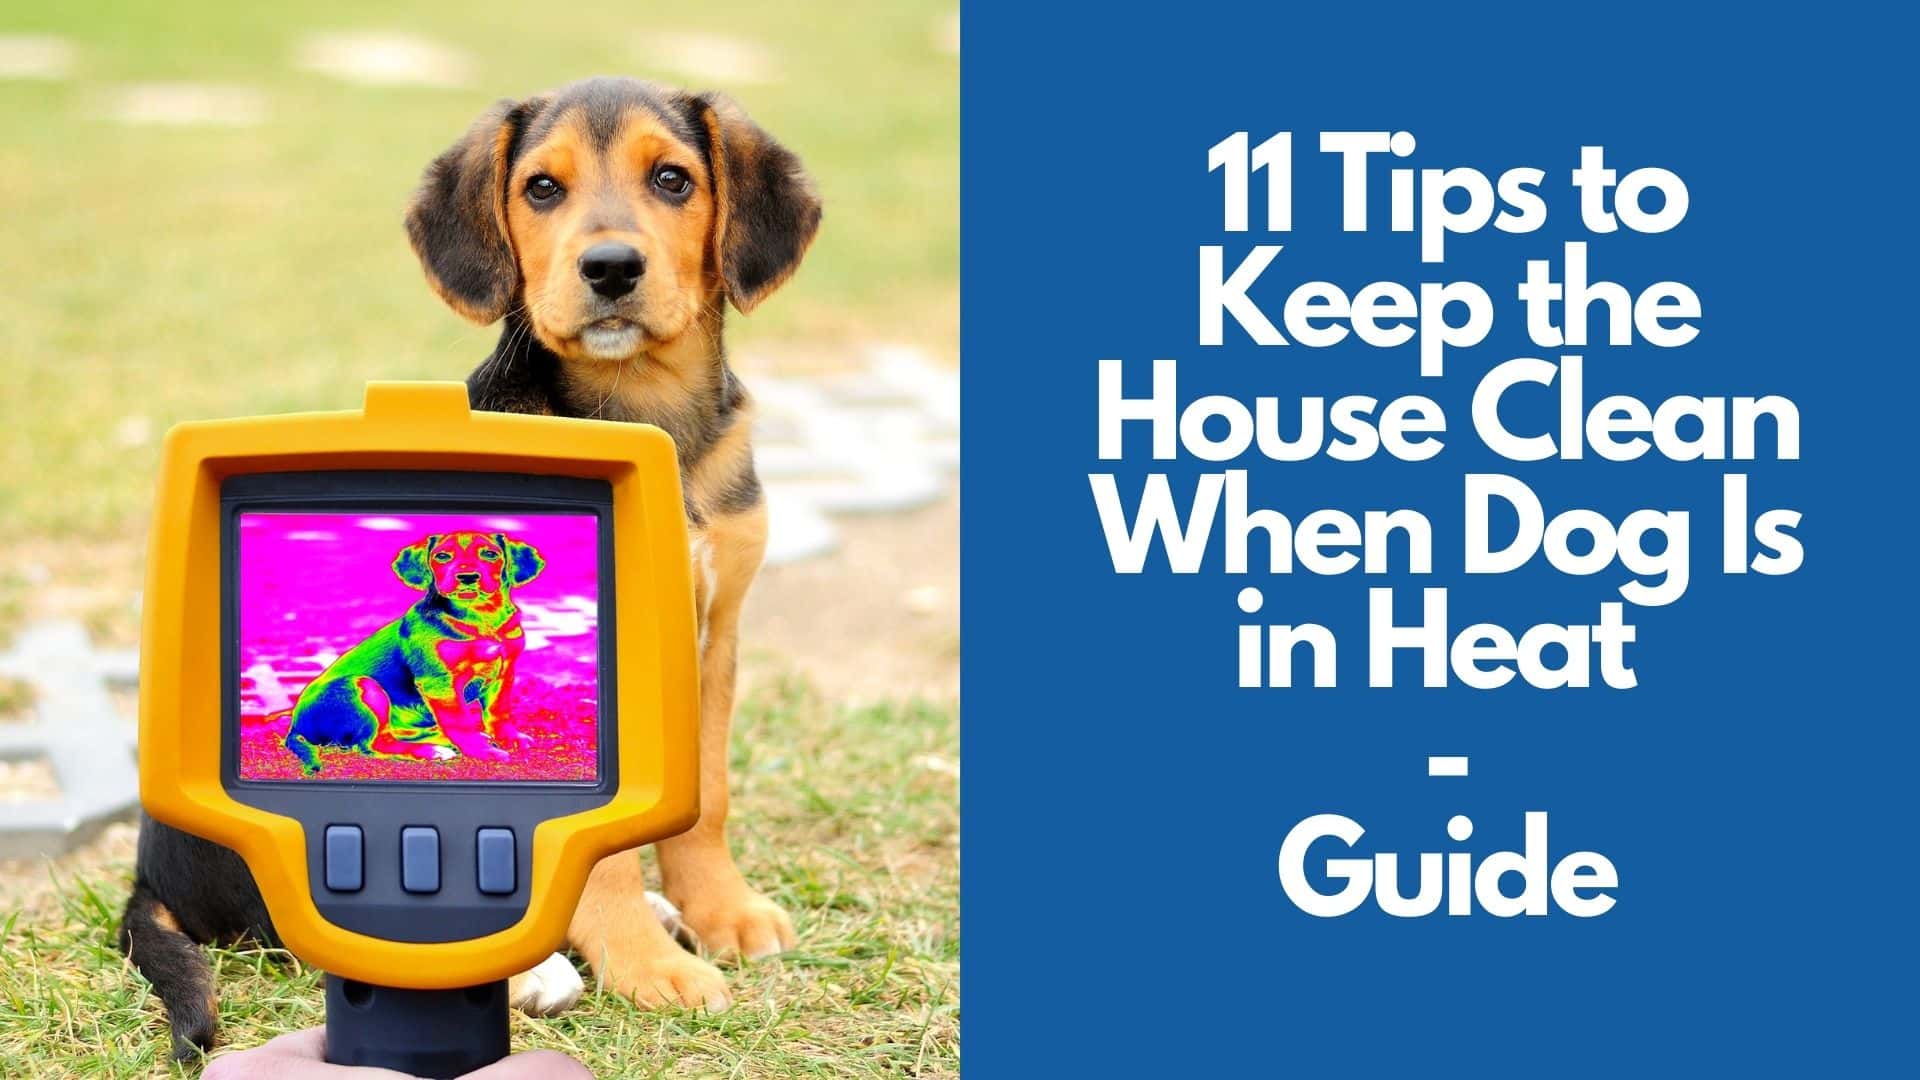 11 Tips to Keep the House Clean When Dog Is in Heat Guide (2)